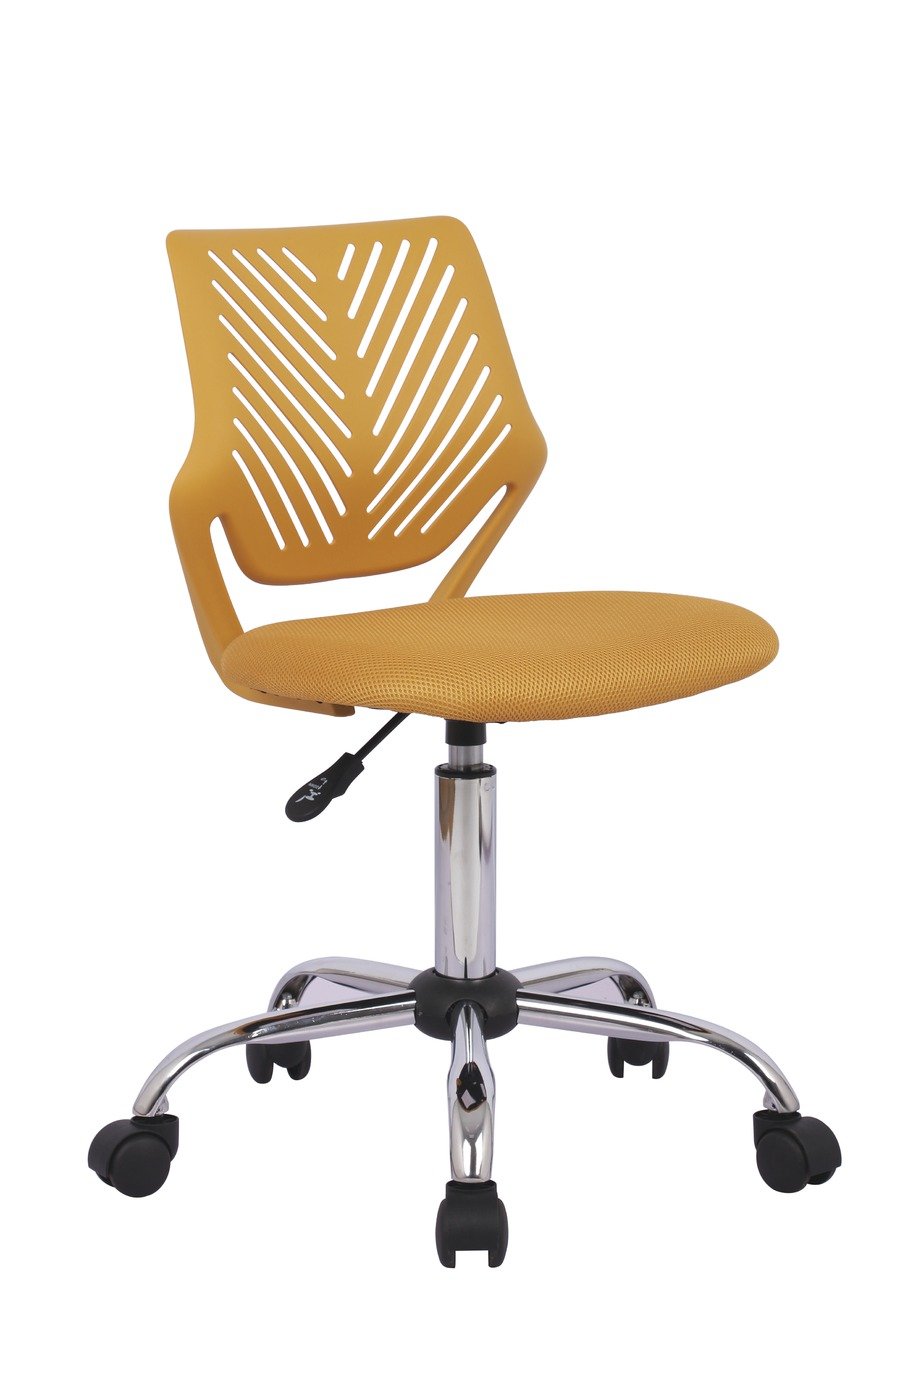 Office chairs | Page 1 | Argos Price Tracker | pricehistory.co.uk